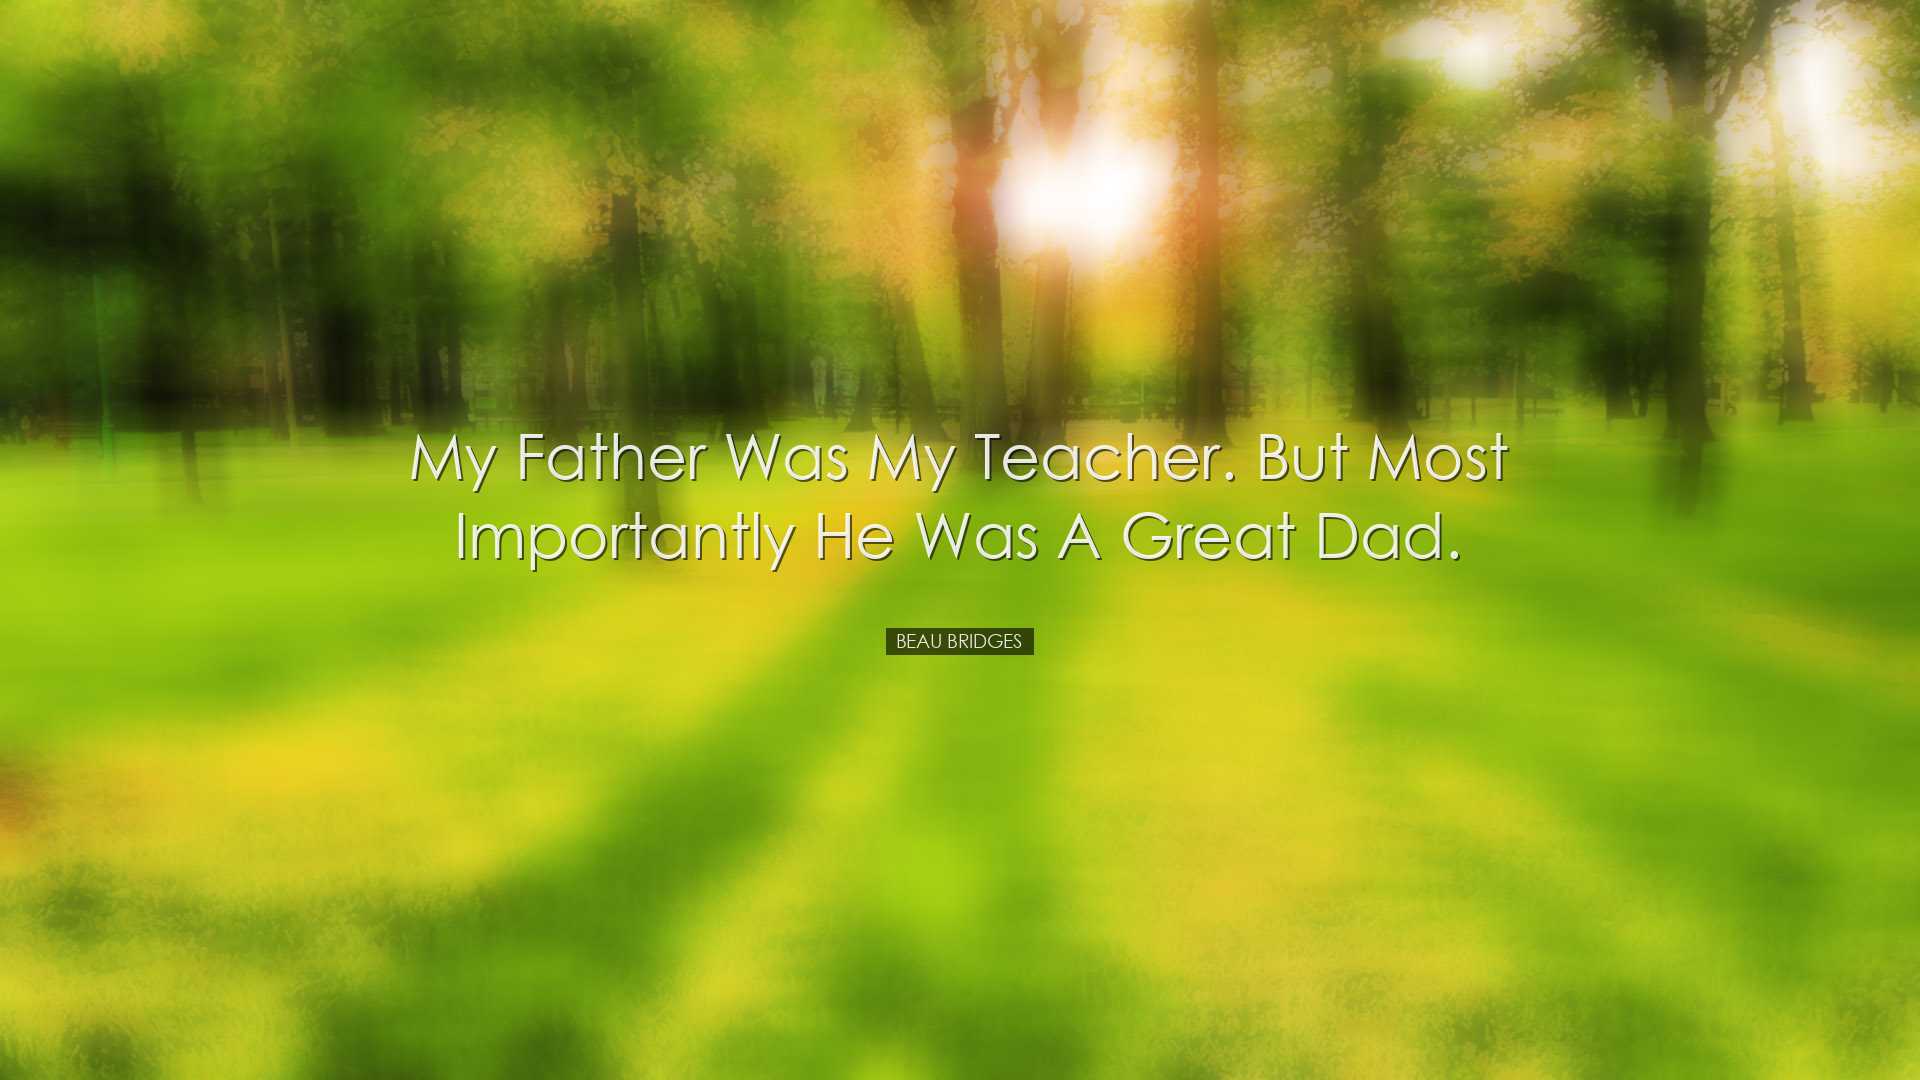 My father was my teacher. But most importantly he was a great dad.